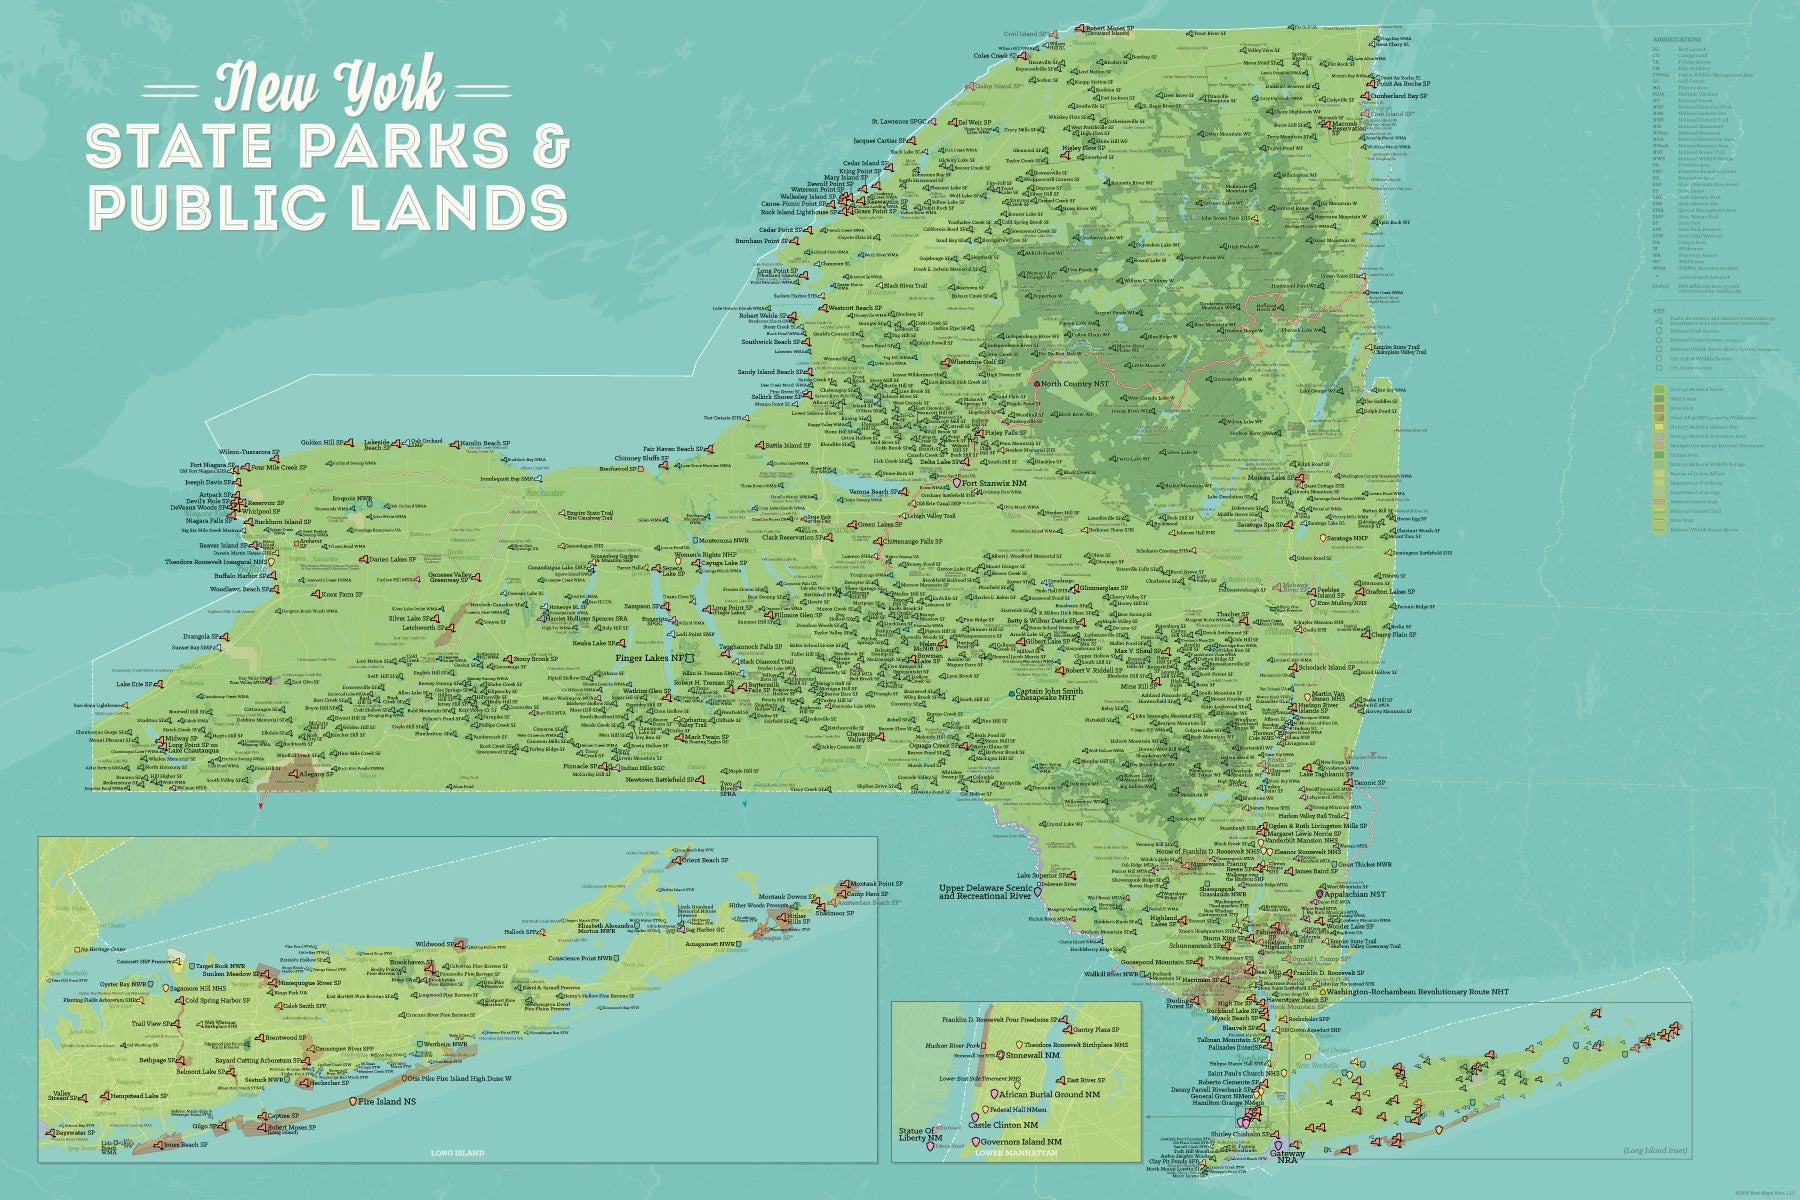 Map Of New York State Parks New York State Parks & Public Land Map 24x36 Poster   Best Maps Ever